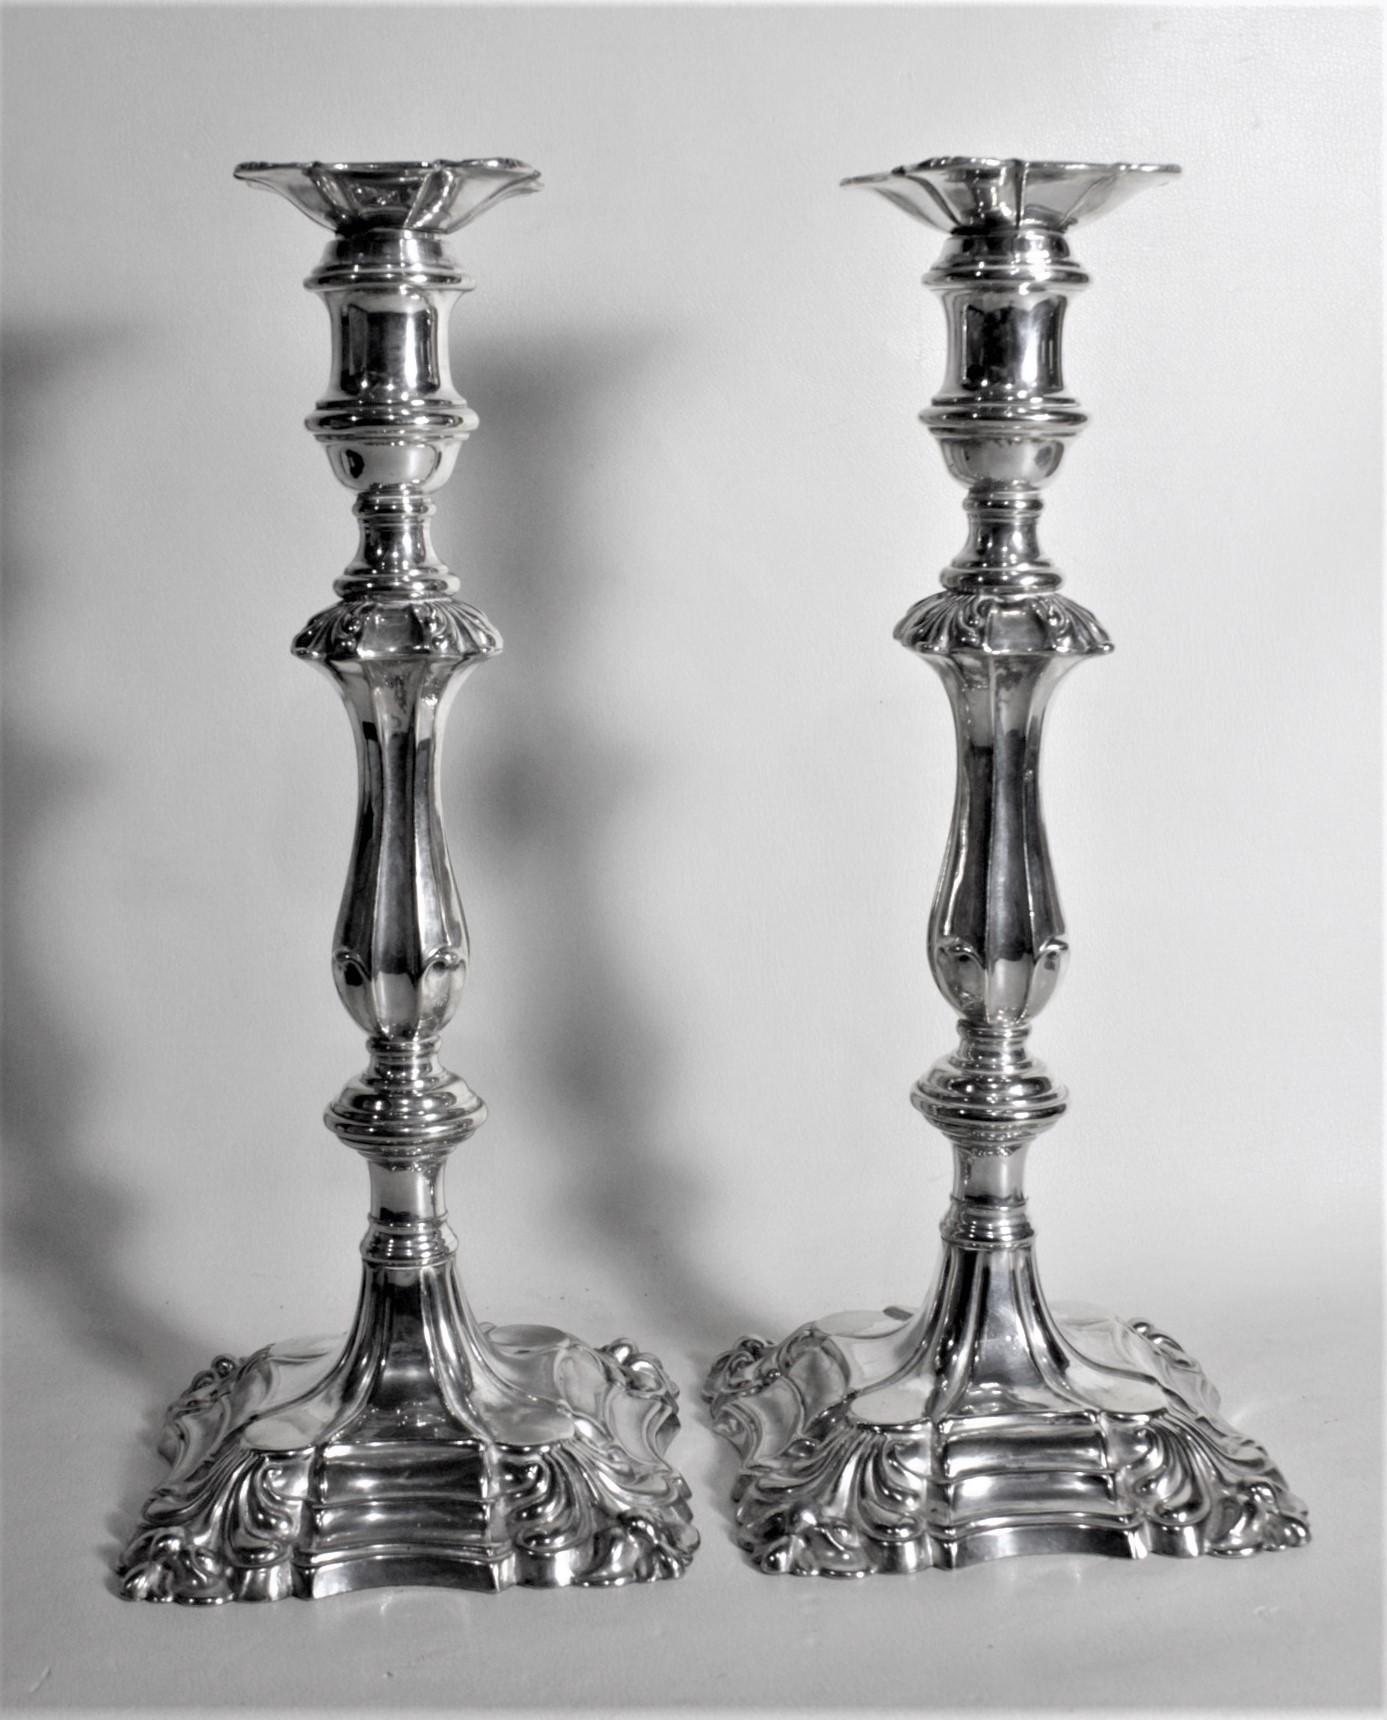 Pair of Antique English Edwardian Silver Plated Candlesticks In Good Condition For Sale In Hamilton, Ontario